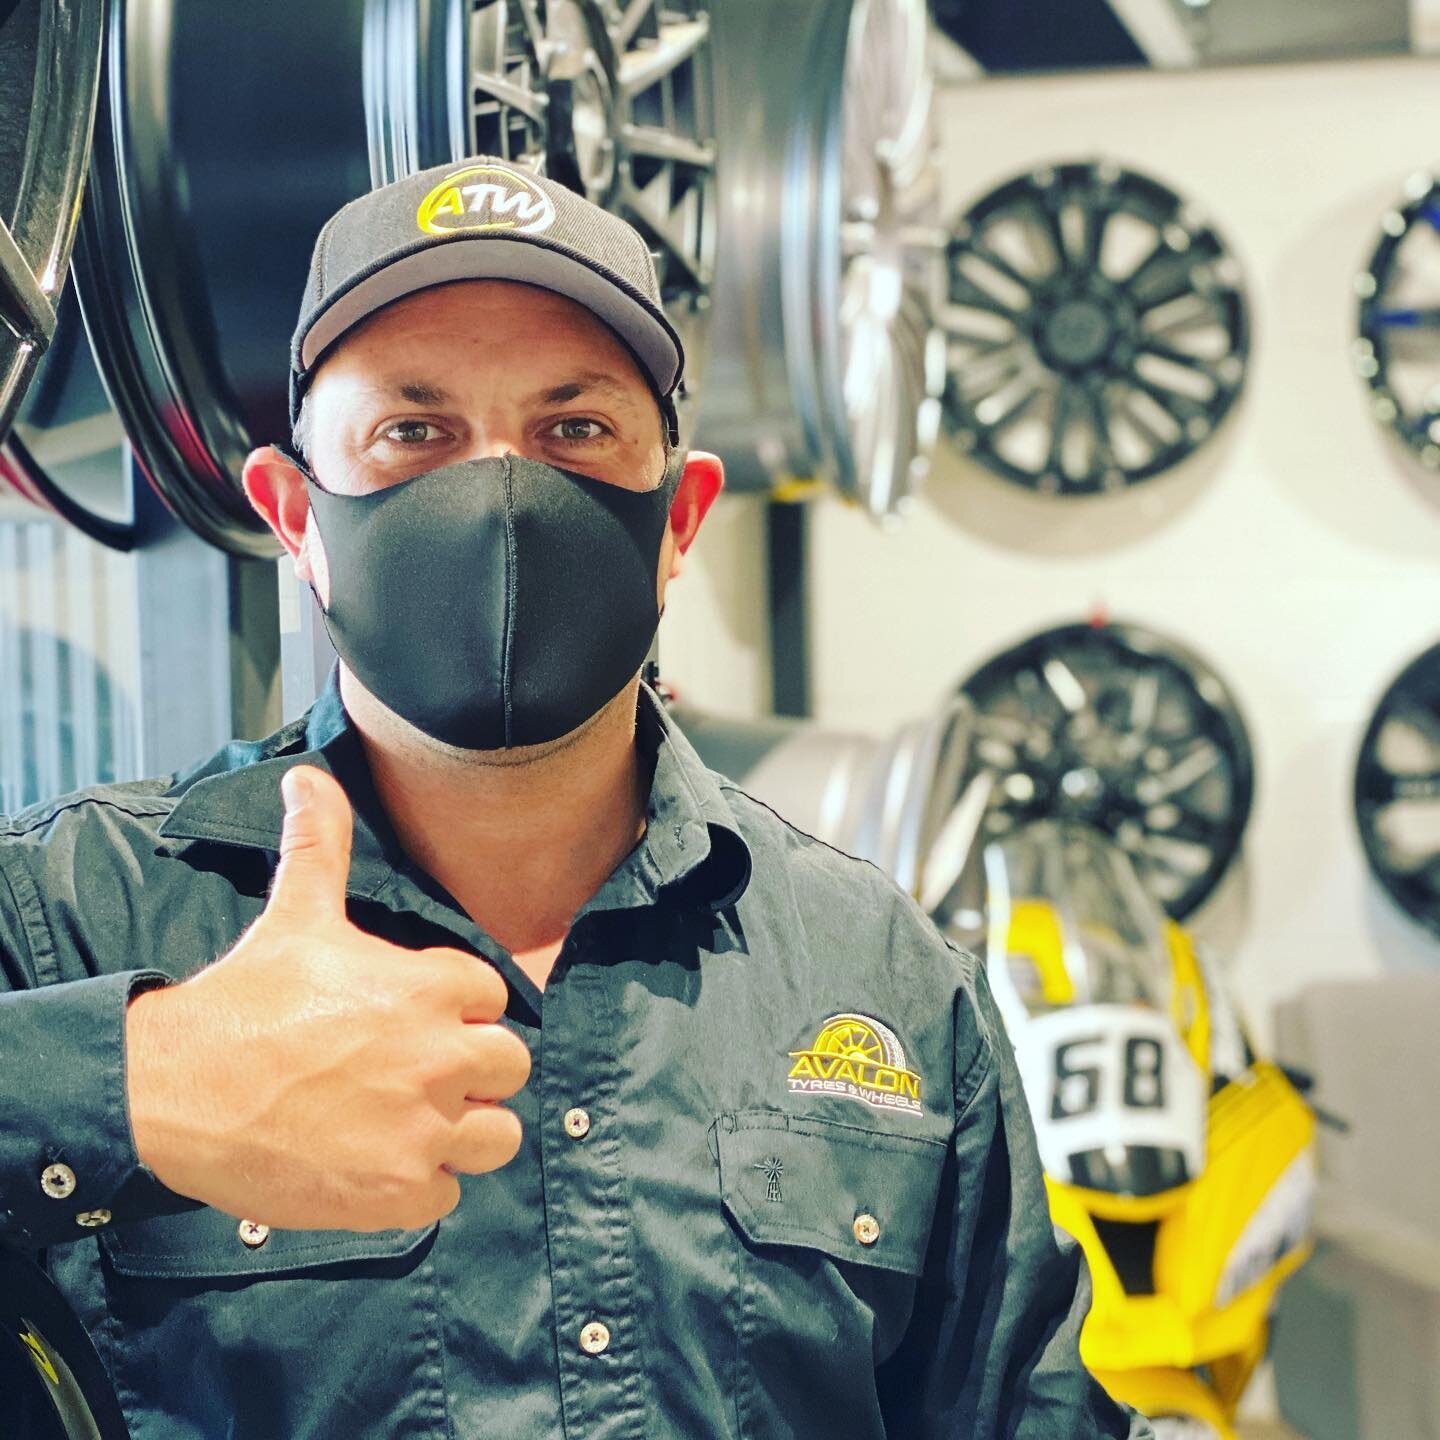 Getting the Corona disguise on point 👌 Our model Peter displaying our black masks which we are giving away to each and every customer #staysafe #coronavirus #blackmask #avalontyres #avalontyresandwheels